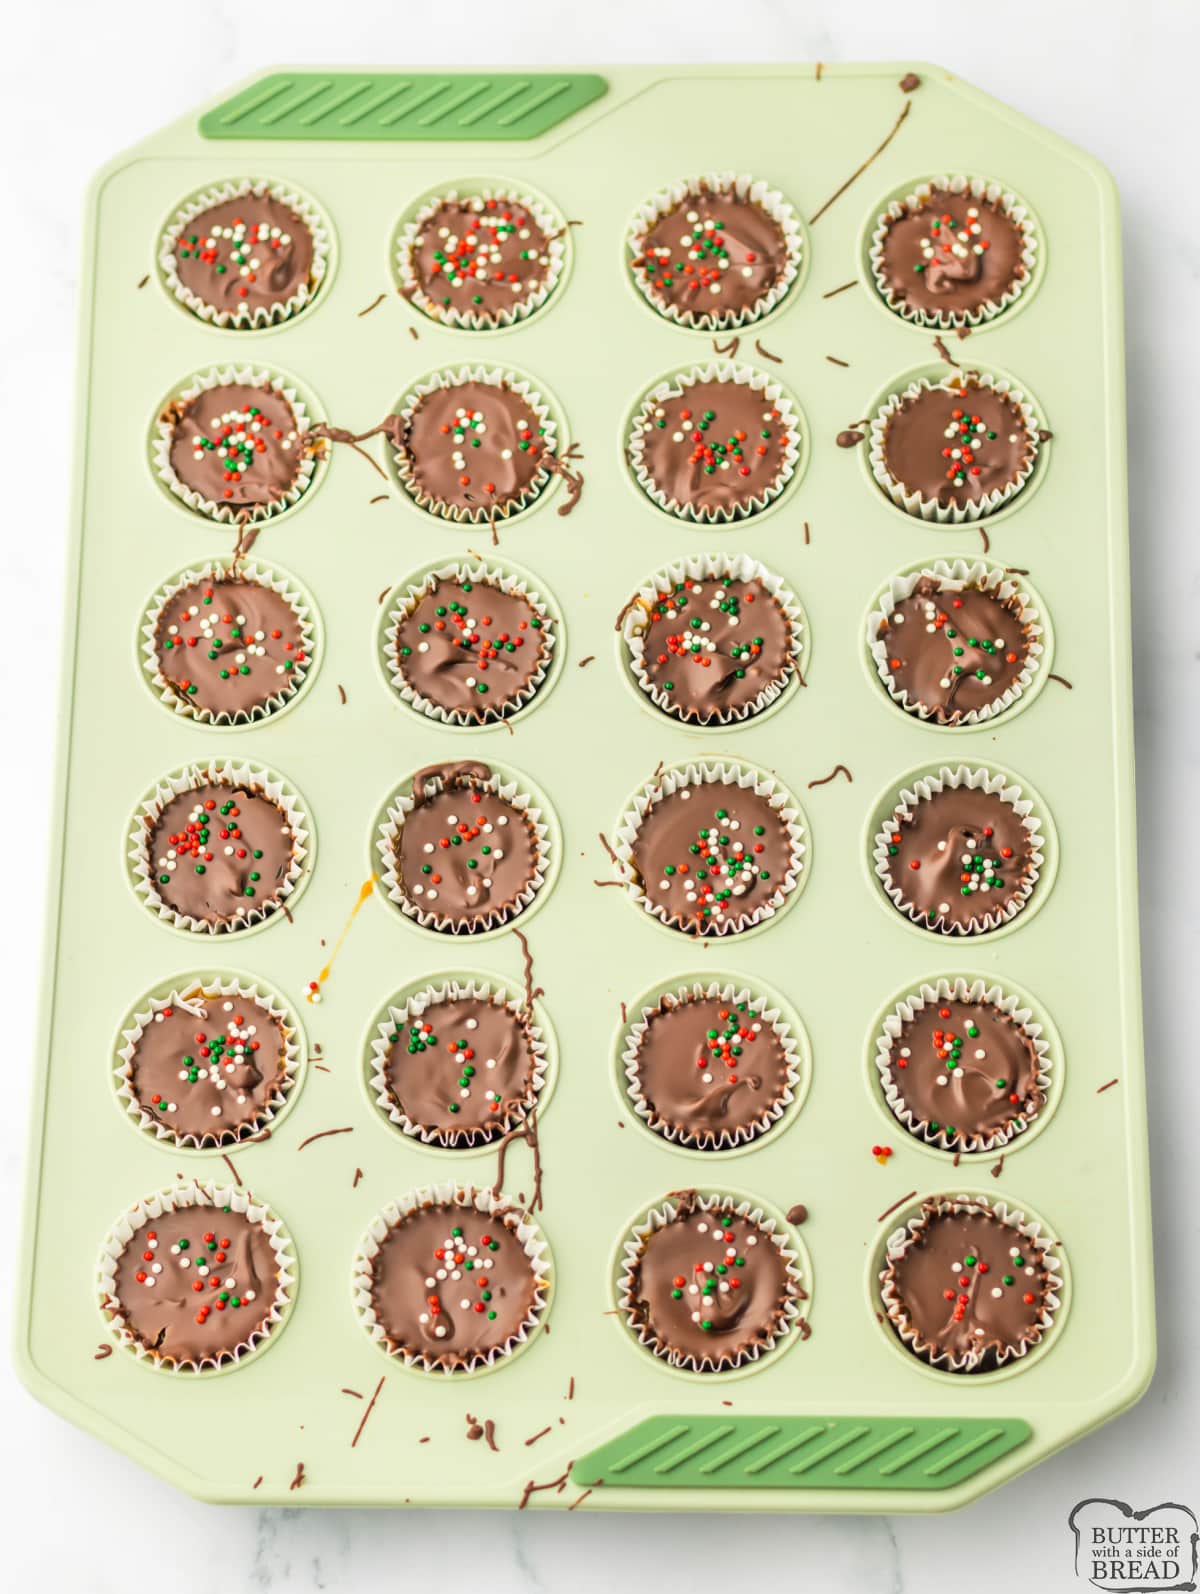 Adding chocolate and sprinkles to chocolate caramel cups.